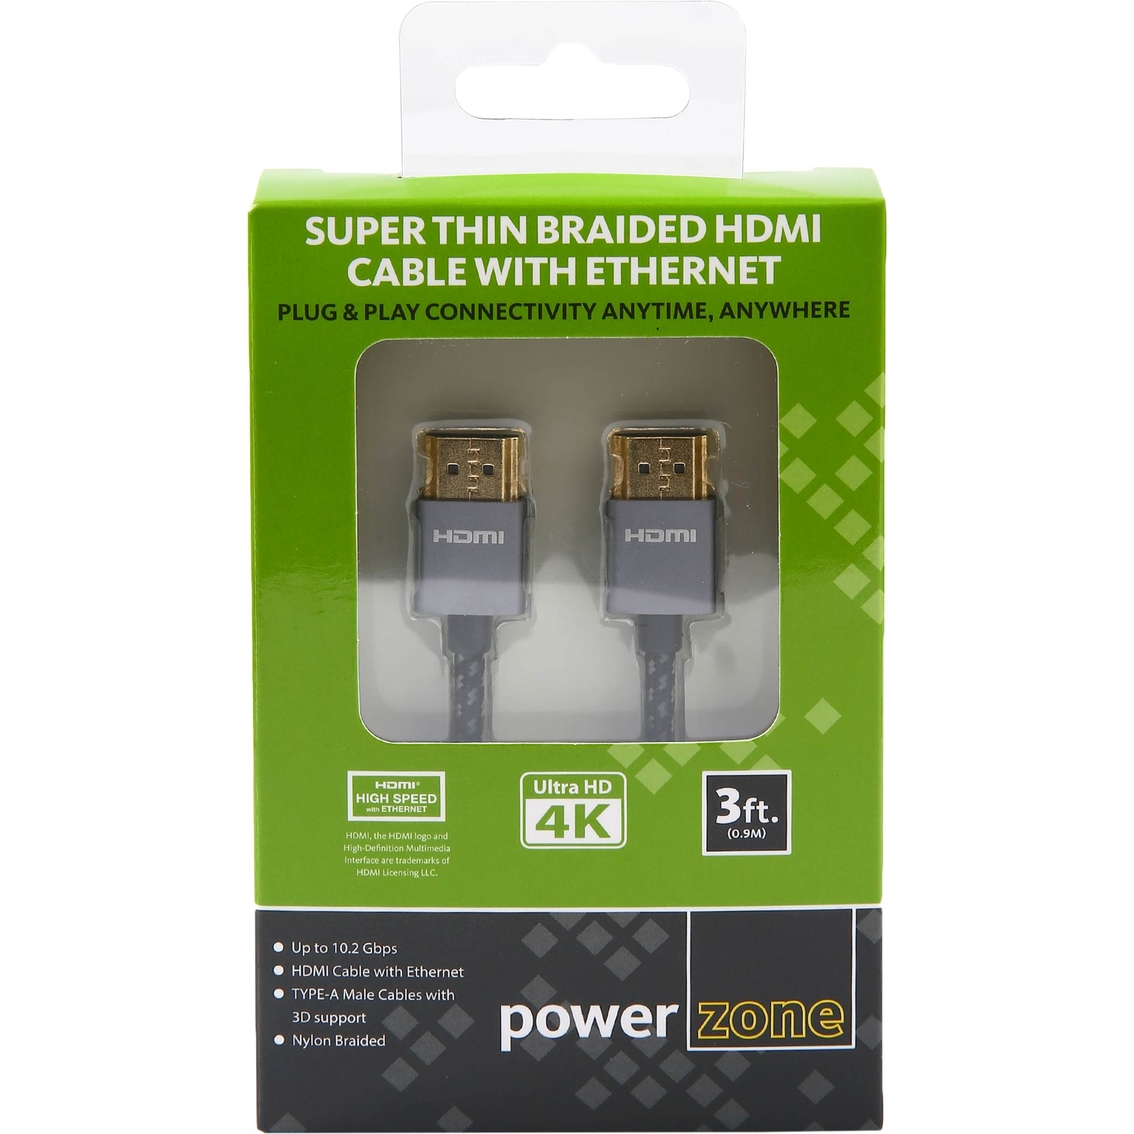 Powerzone Super Thin Braided HDMI Cable with Ethernet - Image 3 of 4